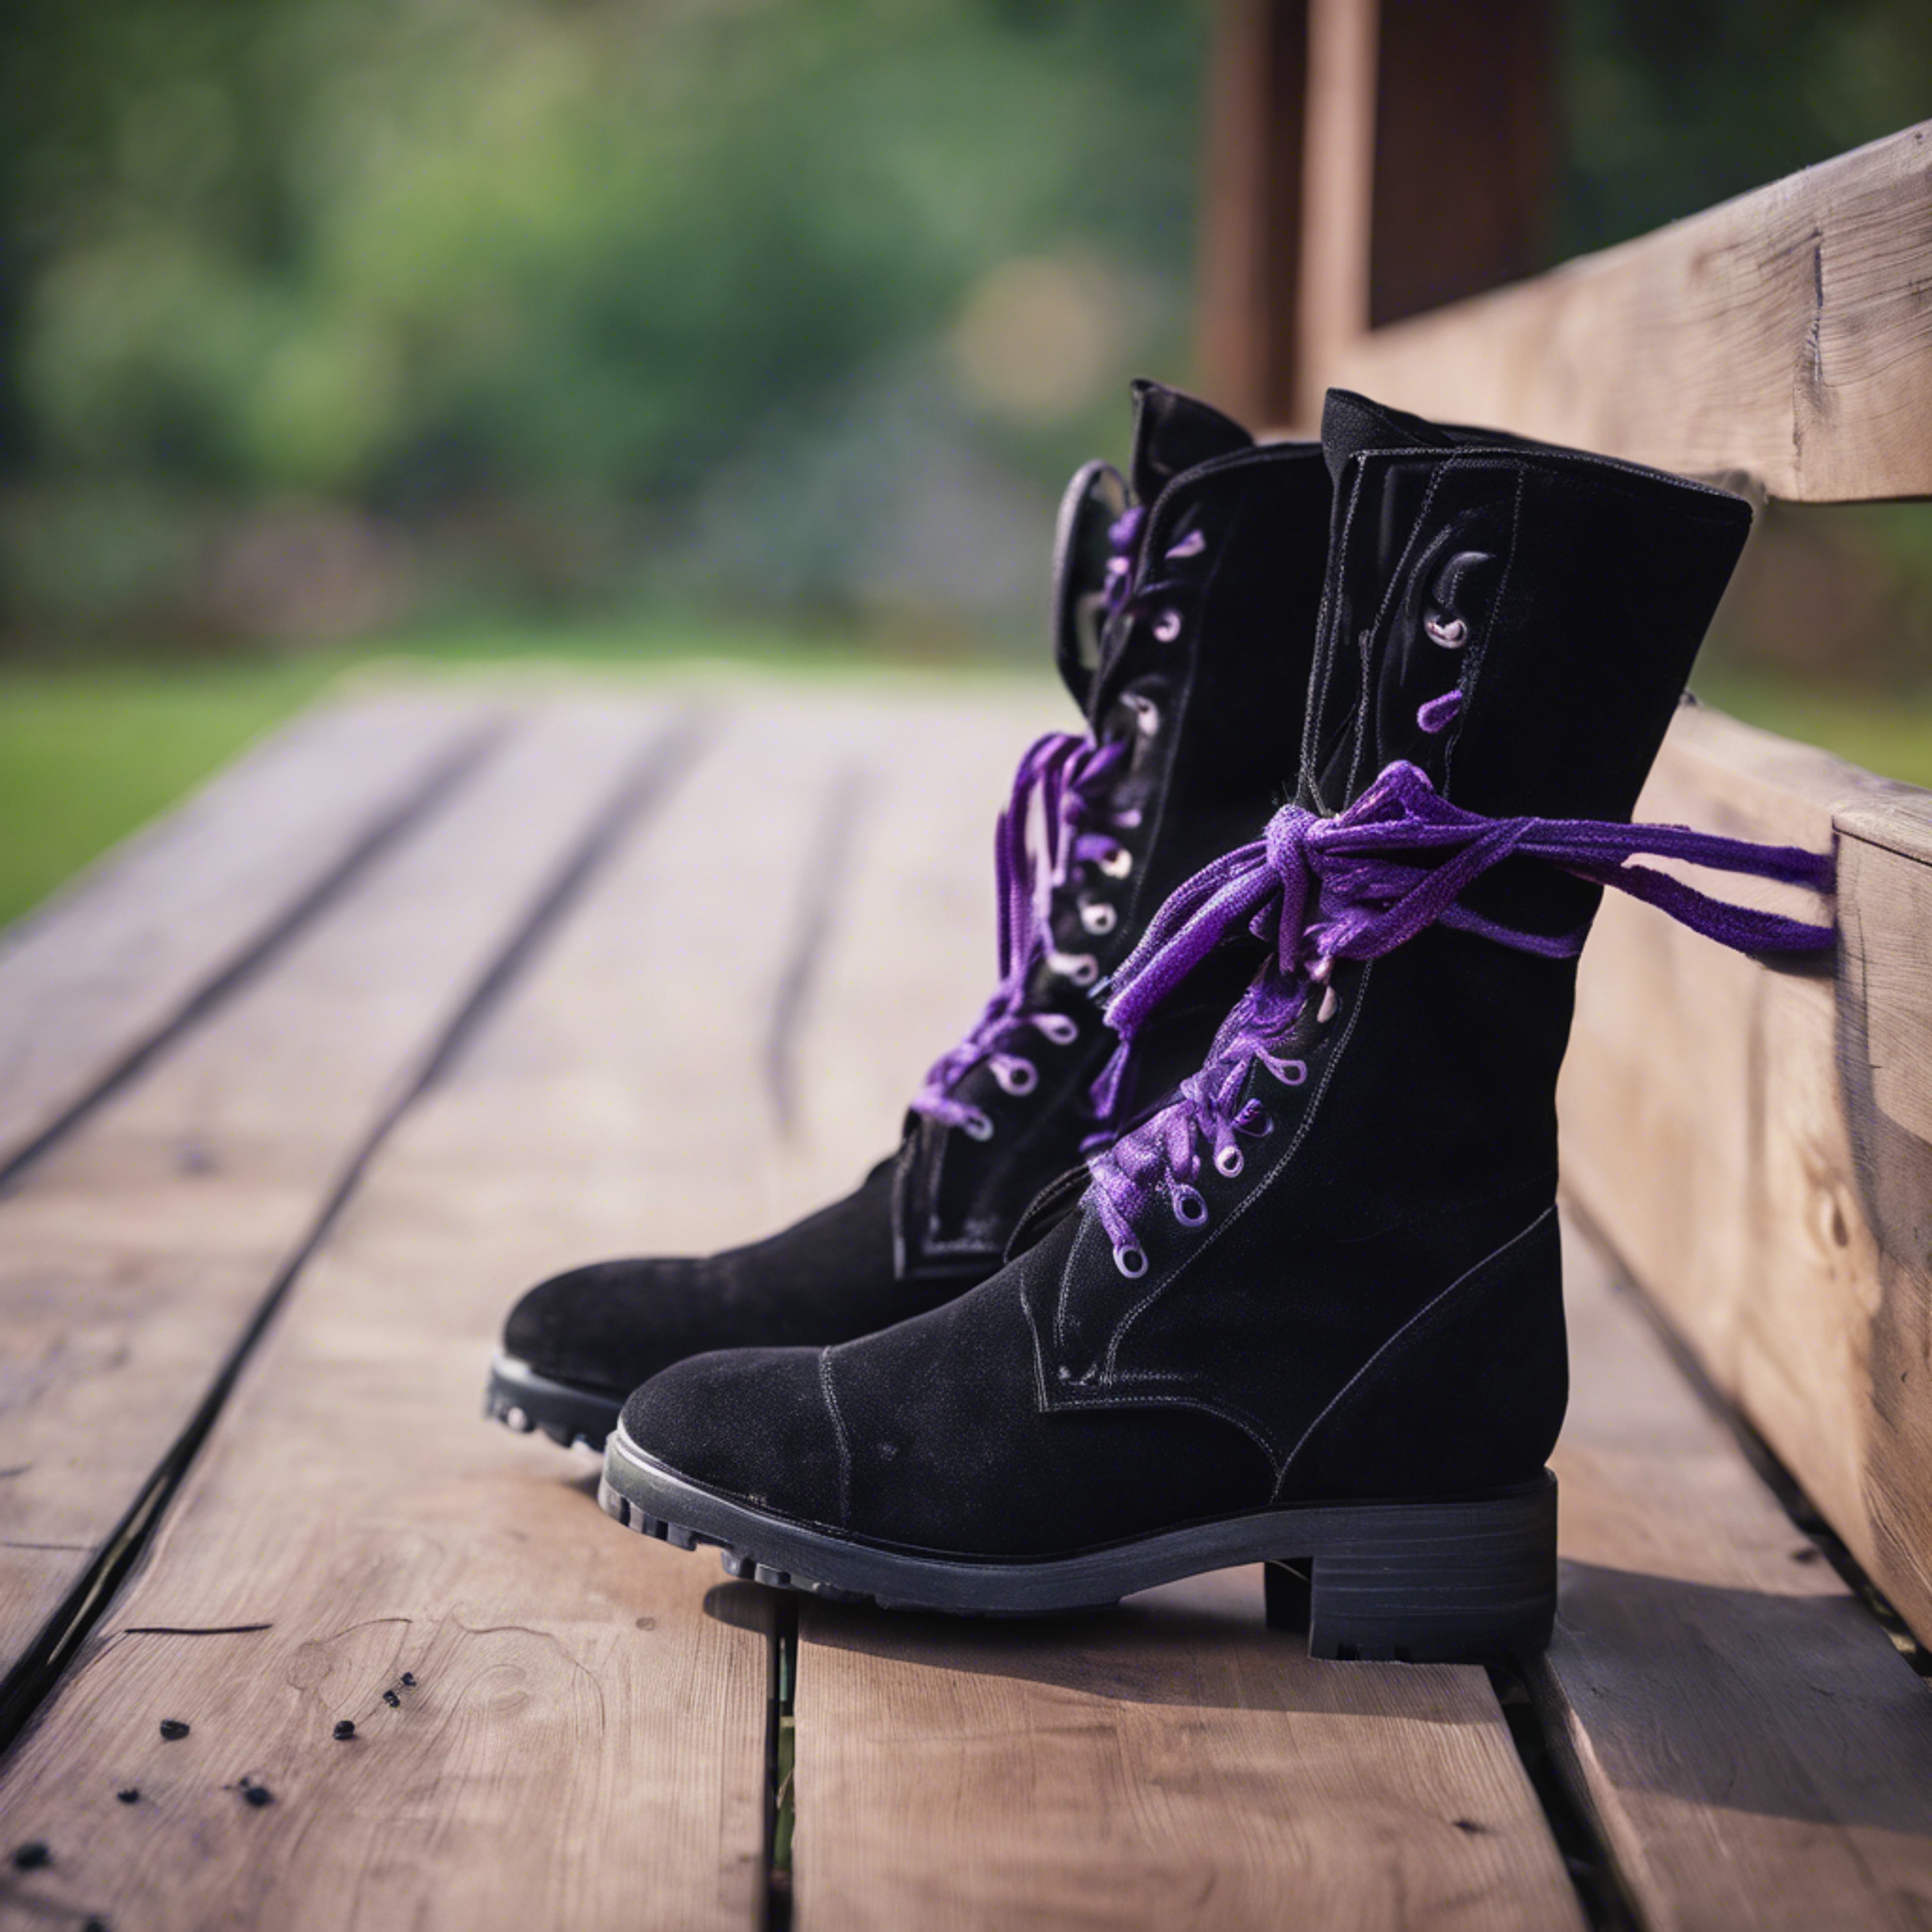 A pair of black suede boots with purple laces left casually on a wooden porch. Tapet[fedd81ee4b6b40088ba0]